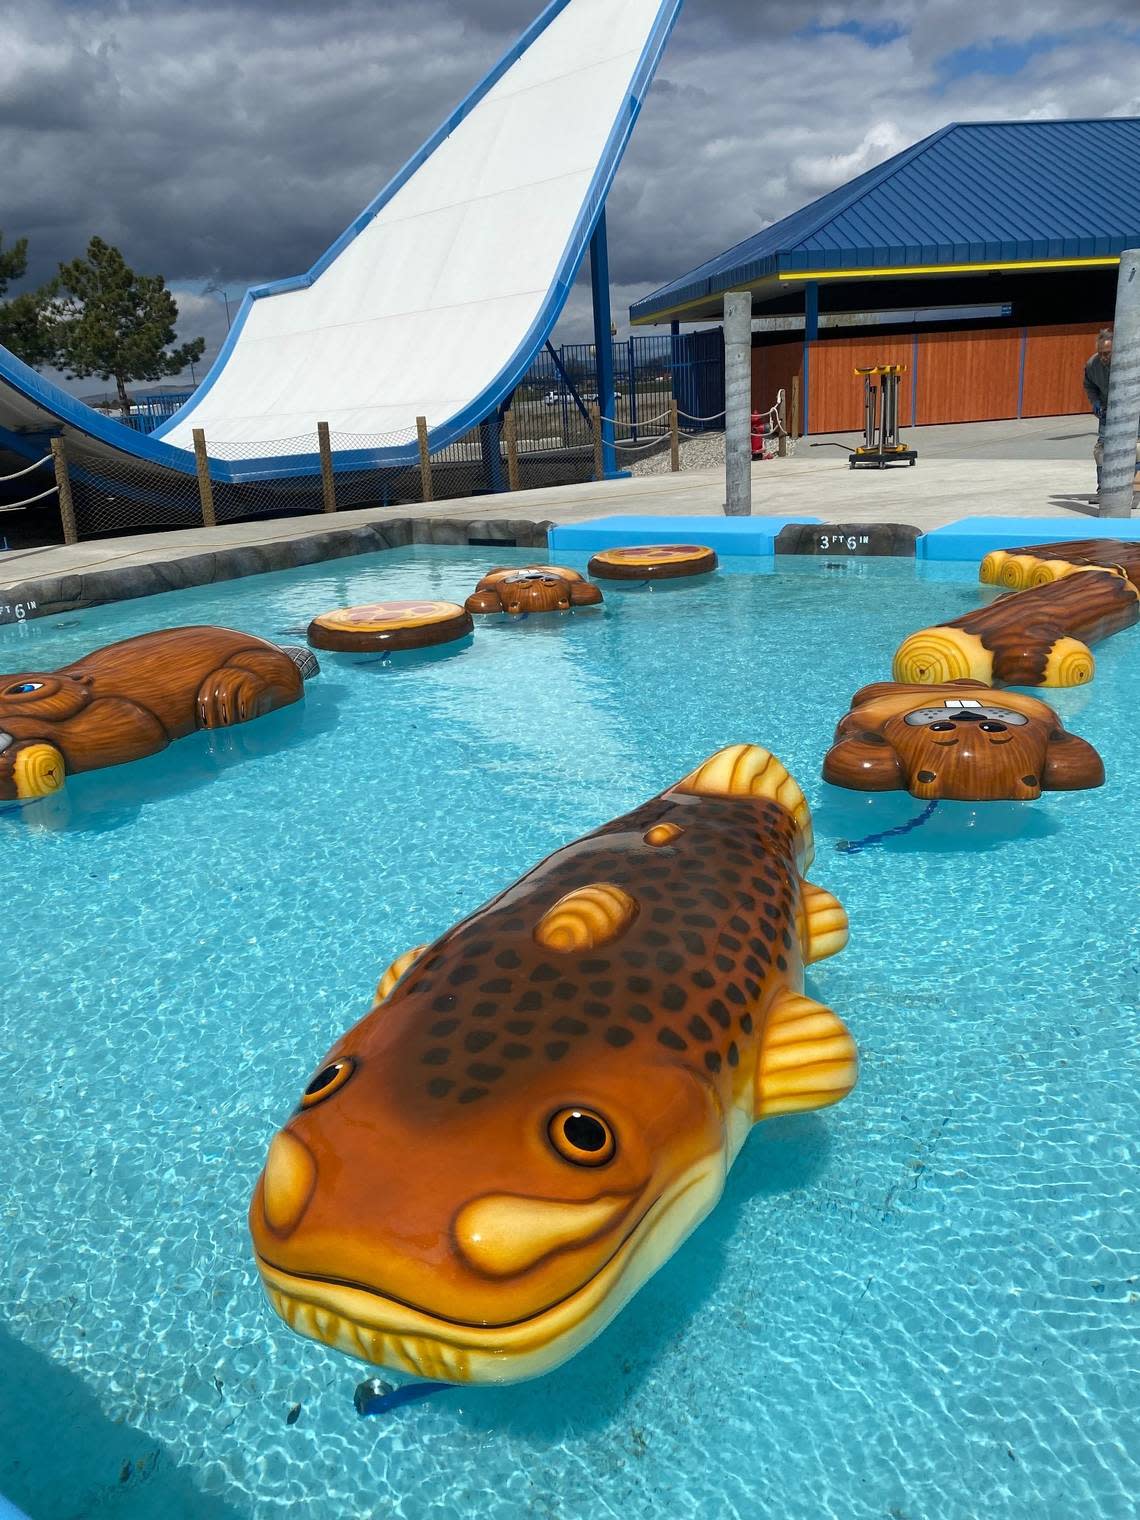 Critter Crossing, one of three new attractions at Roaring Springs Water Park, features fish, log and beaver-themed floats that guests can cross using overhead ropes. The expansion will open May 31.